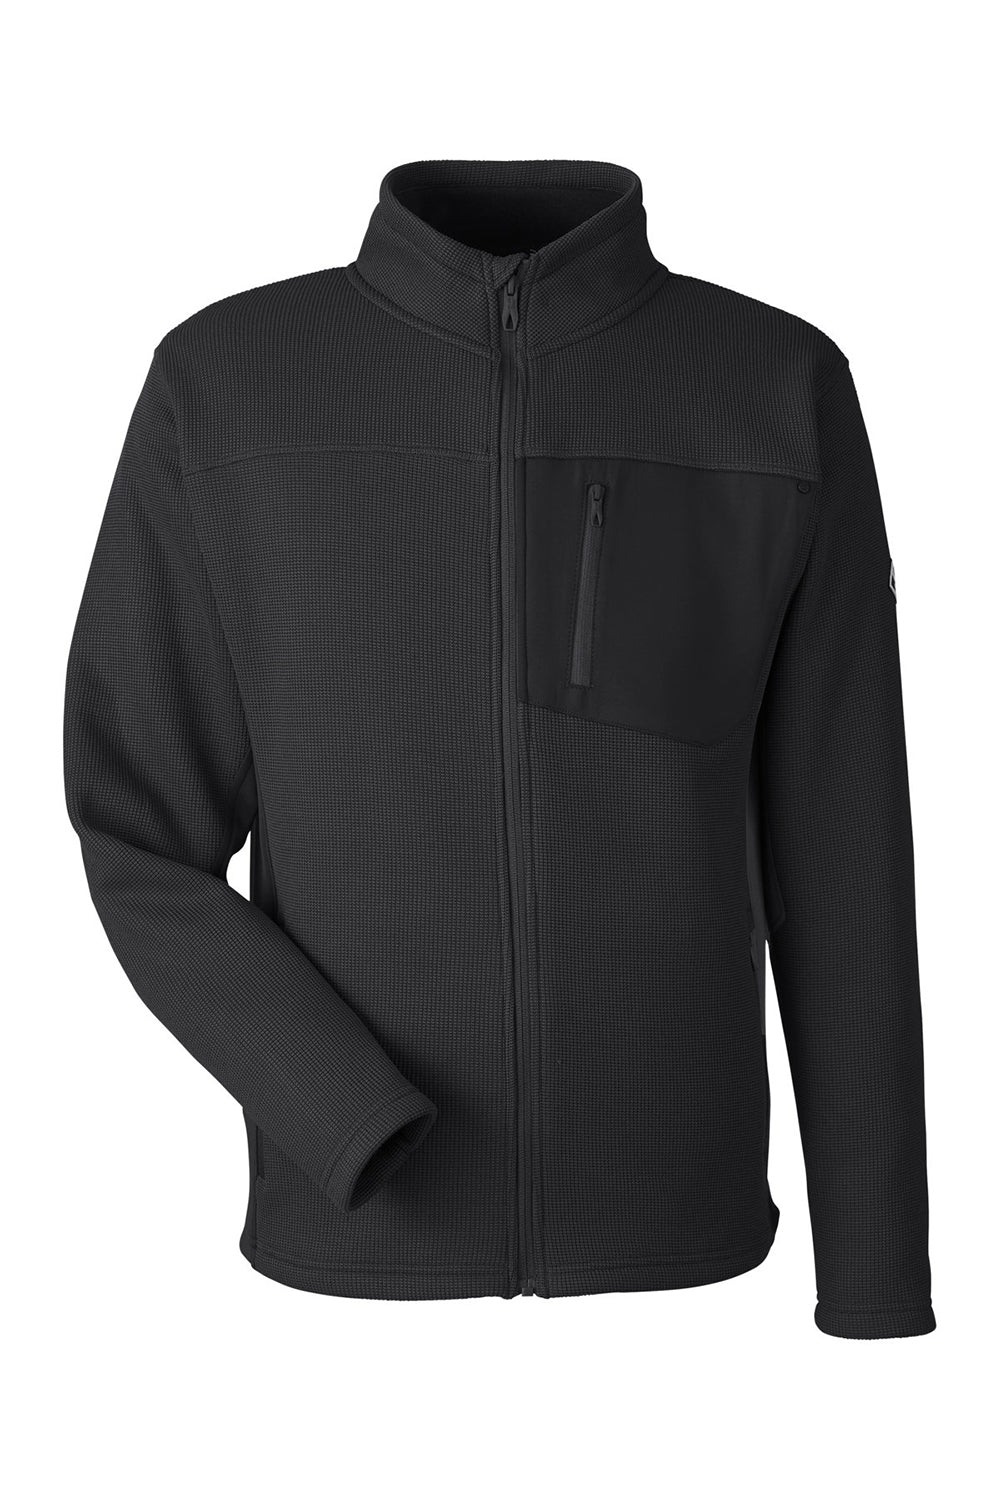 Spyder S17936 Mens Constant Canyon Full Zip Sweater Jacket Black Flat Front